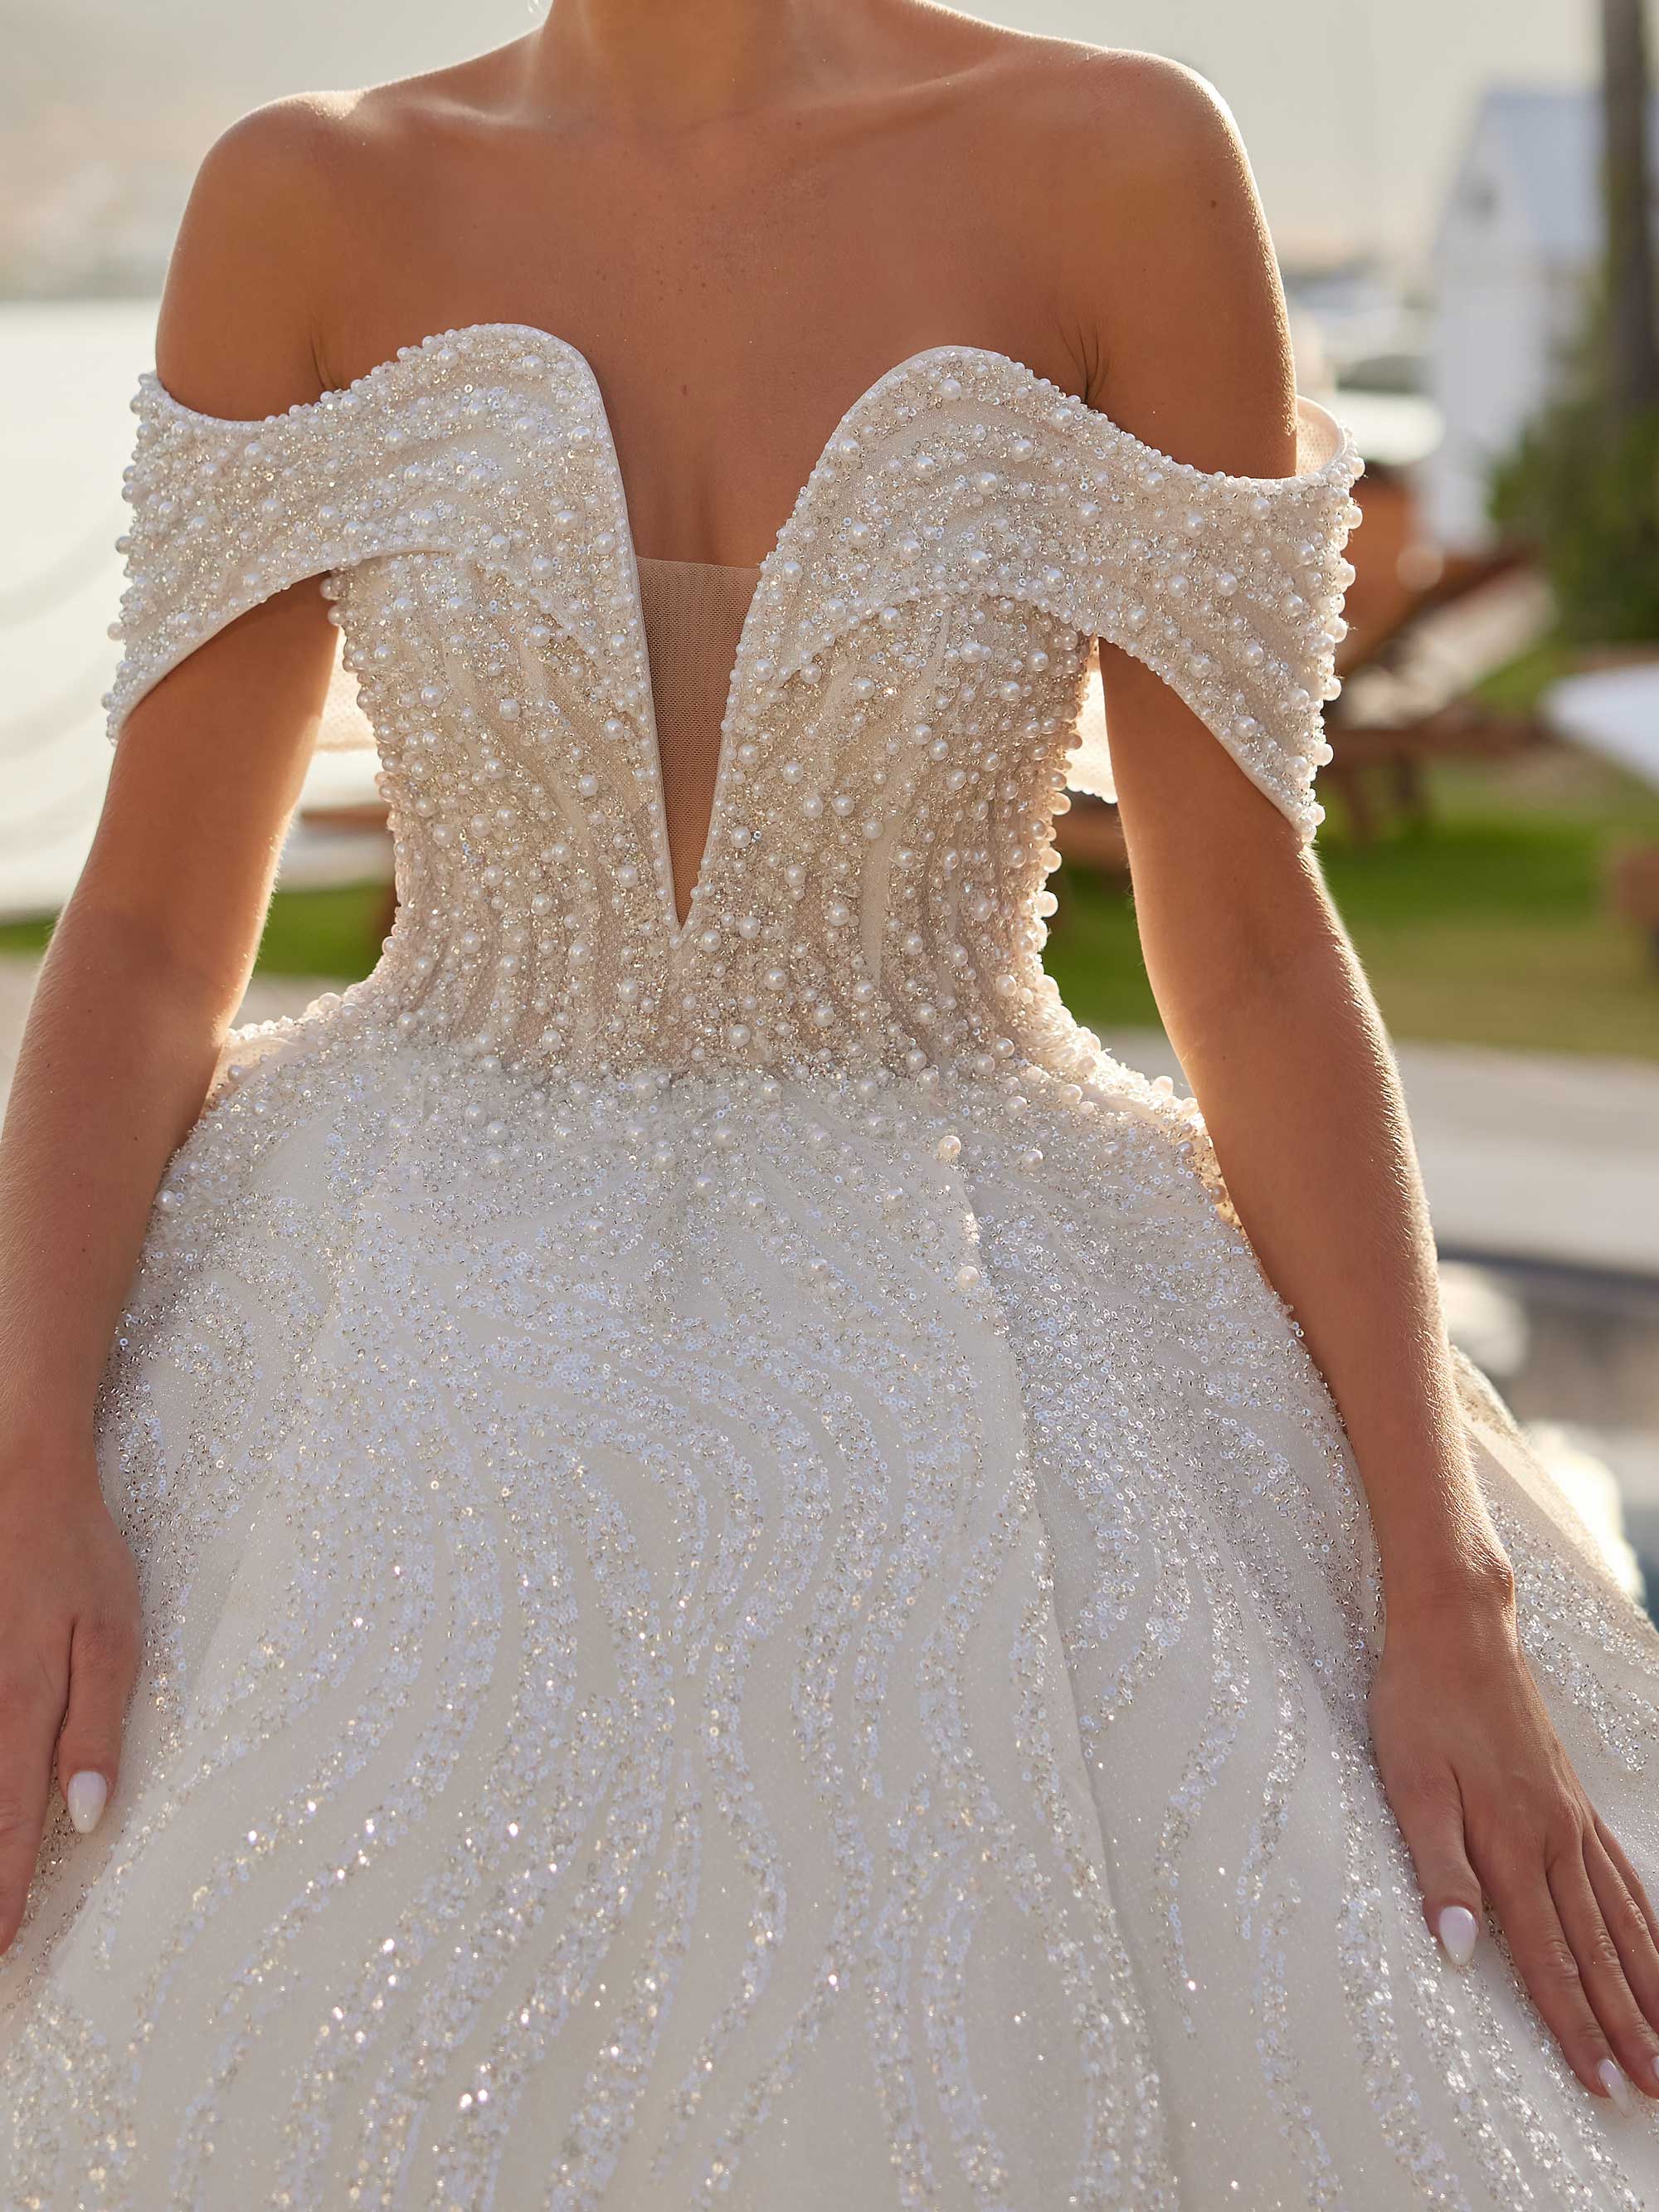 buy Unique Deep V Neck Off The Shoulder White Pearl Bridal Dress. Full pearl embellishments and a chic deep v neck online stores plus sizes